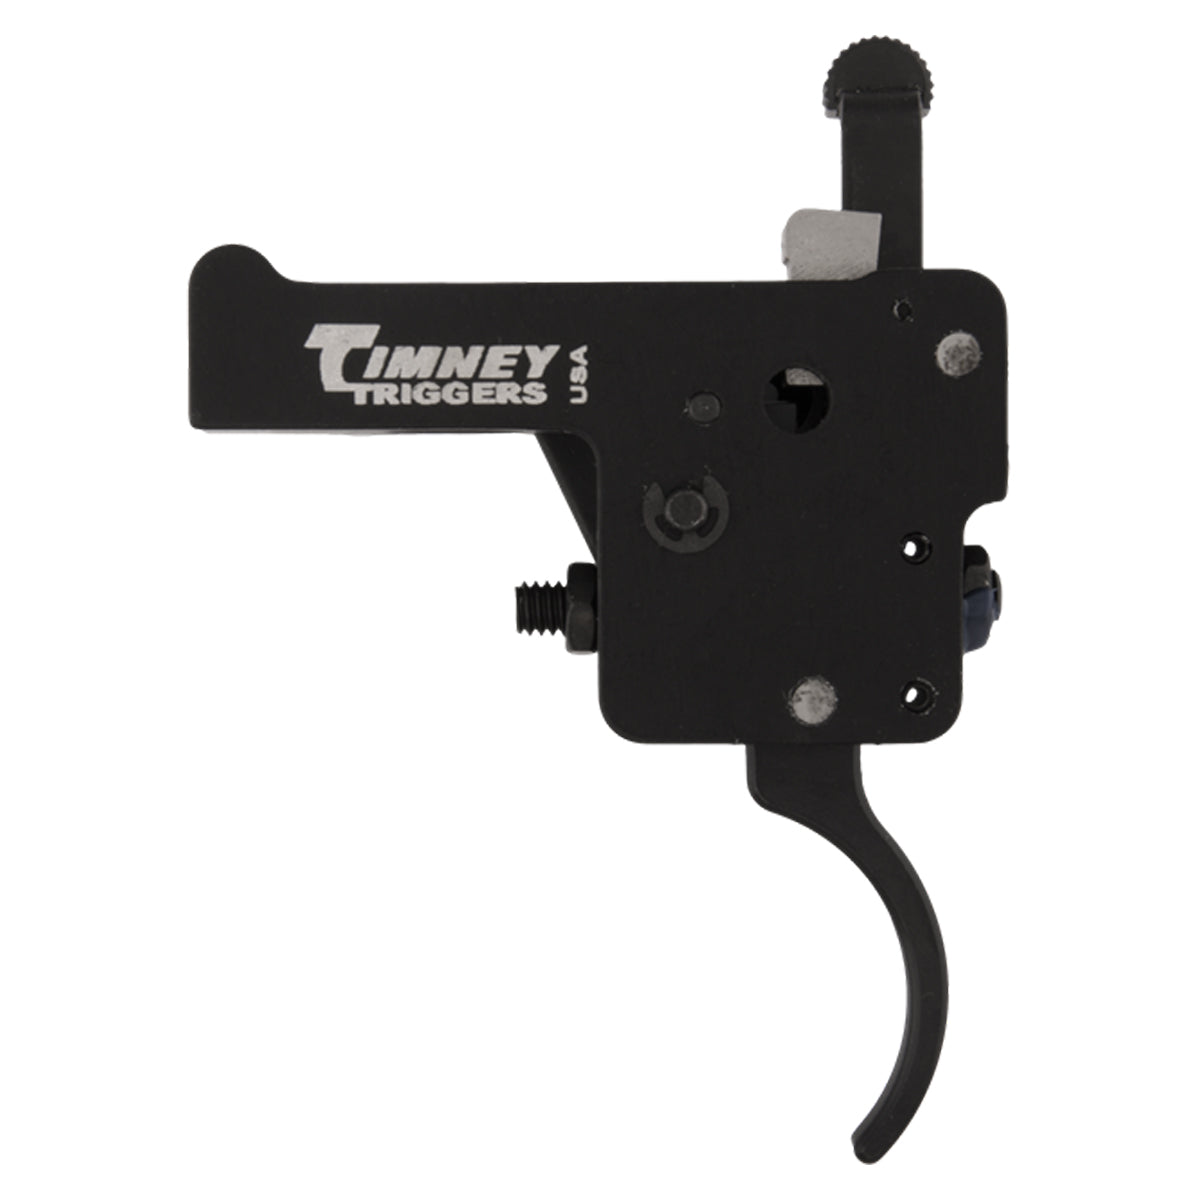 Timney Triggers Howa Trigger Upgrade Trigger in  by GOHUNT | Timney Triggers - GOHUNT Shop